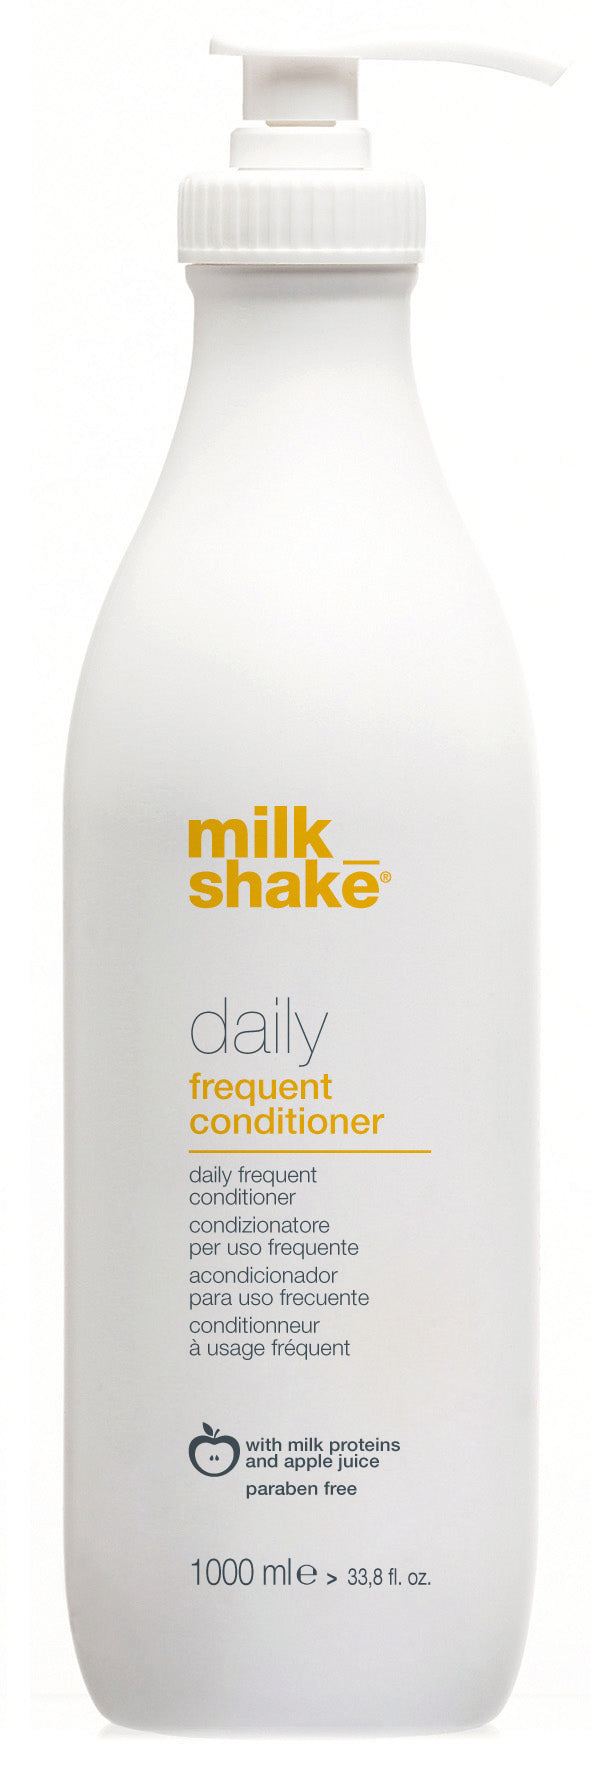 milk_shake daily frequent conditioner